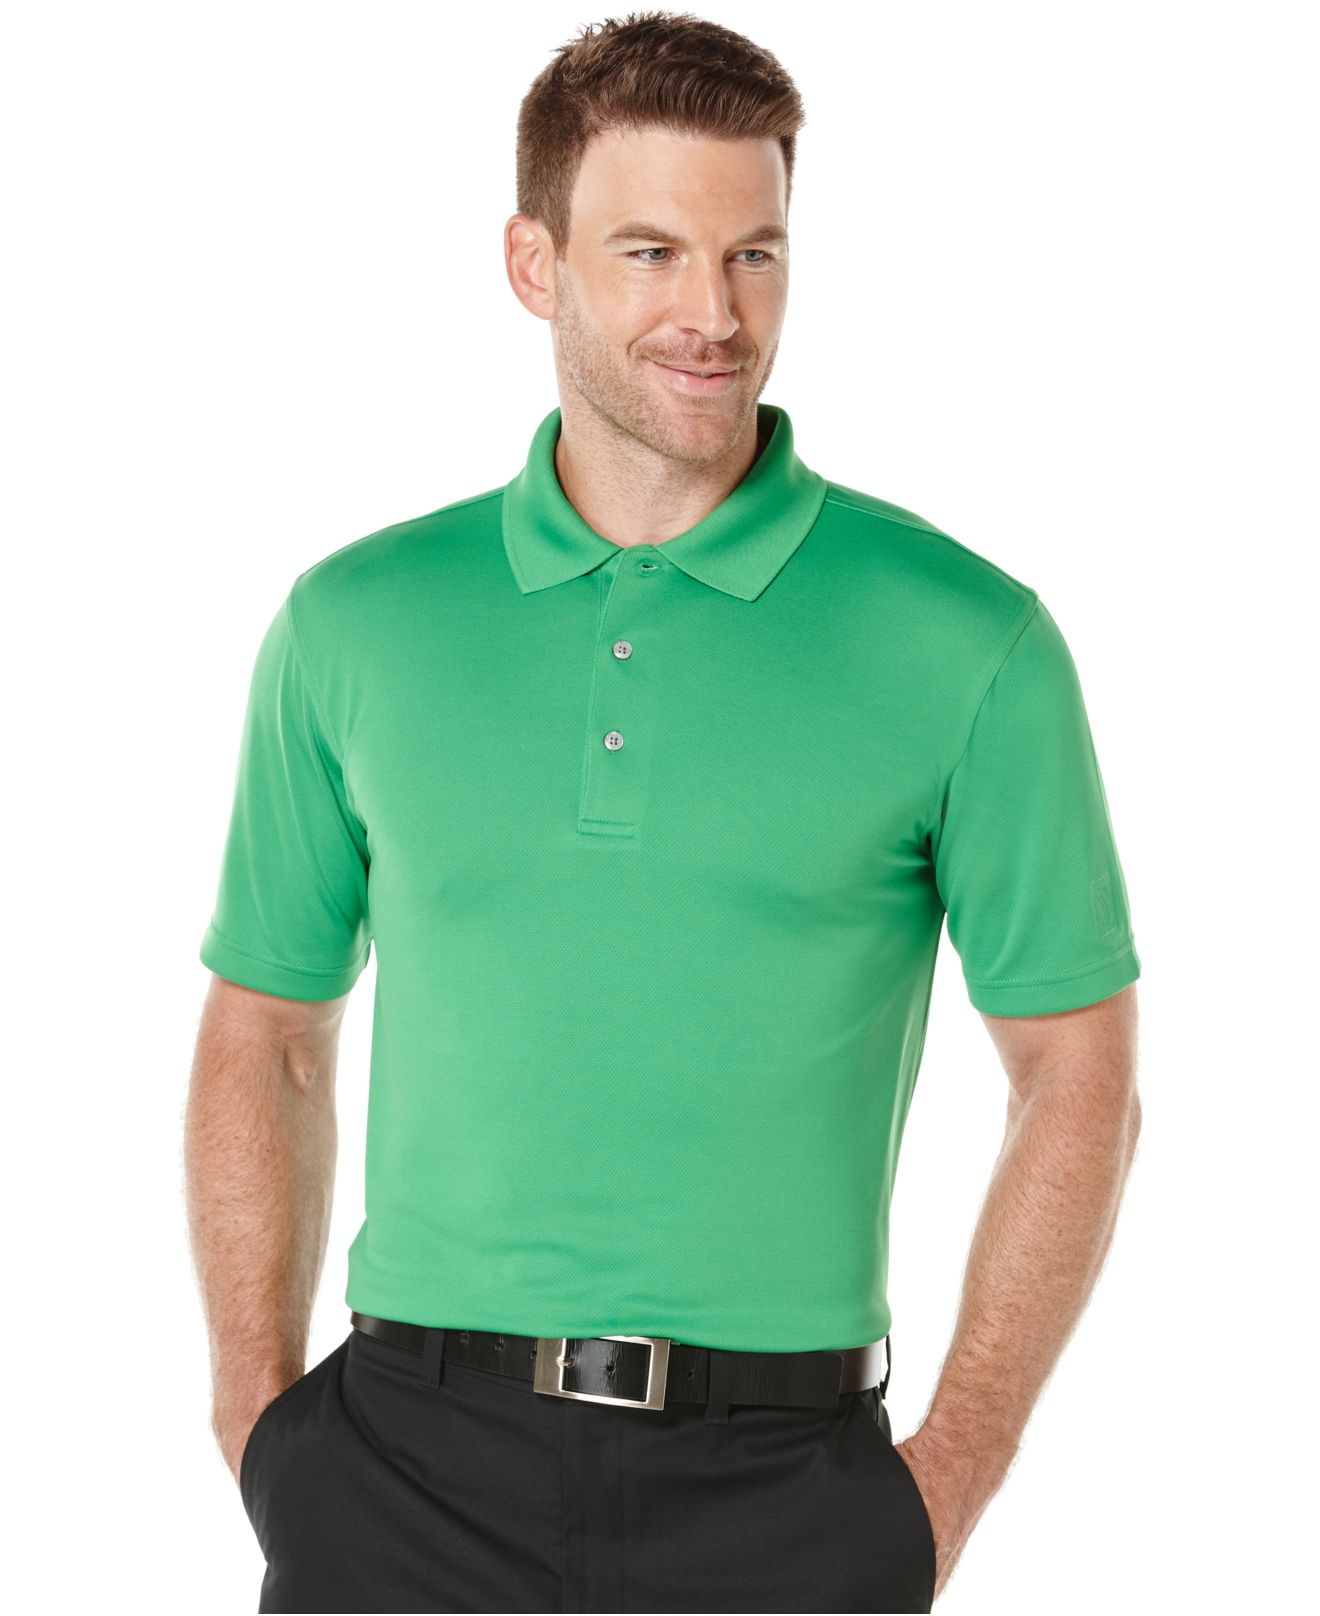 Lyst - Pga Tour Performance Solid Mesh Golf Polo in Green for Men